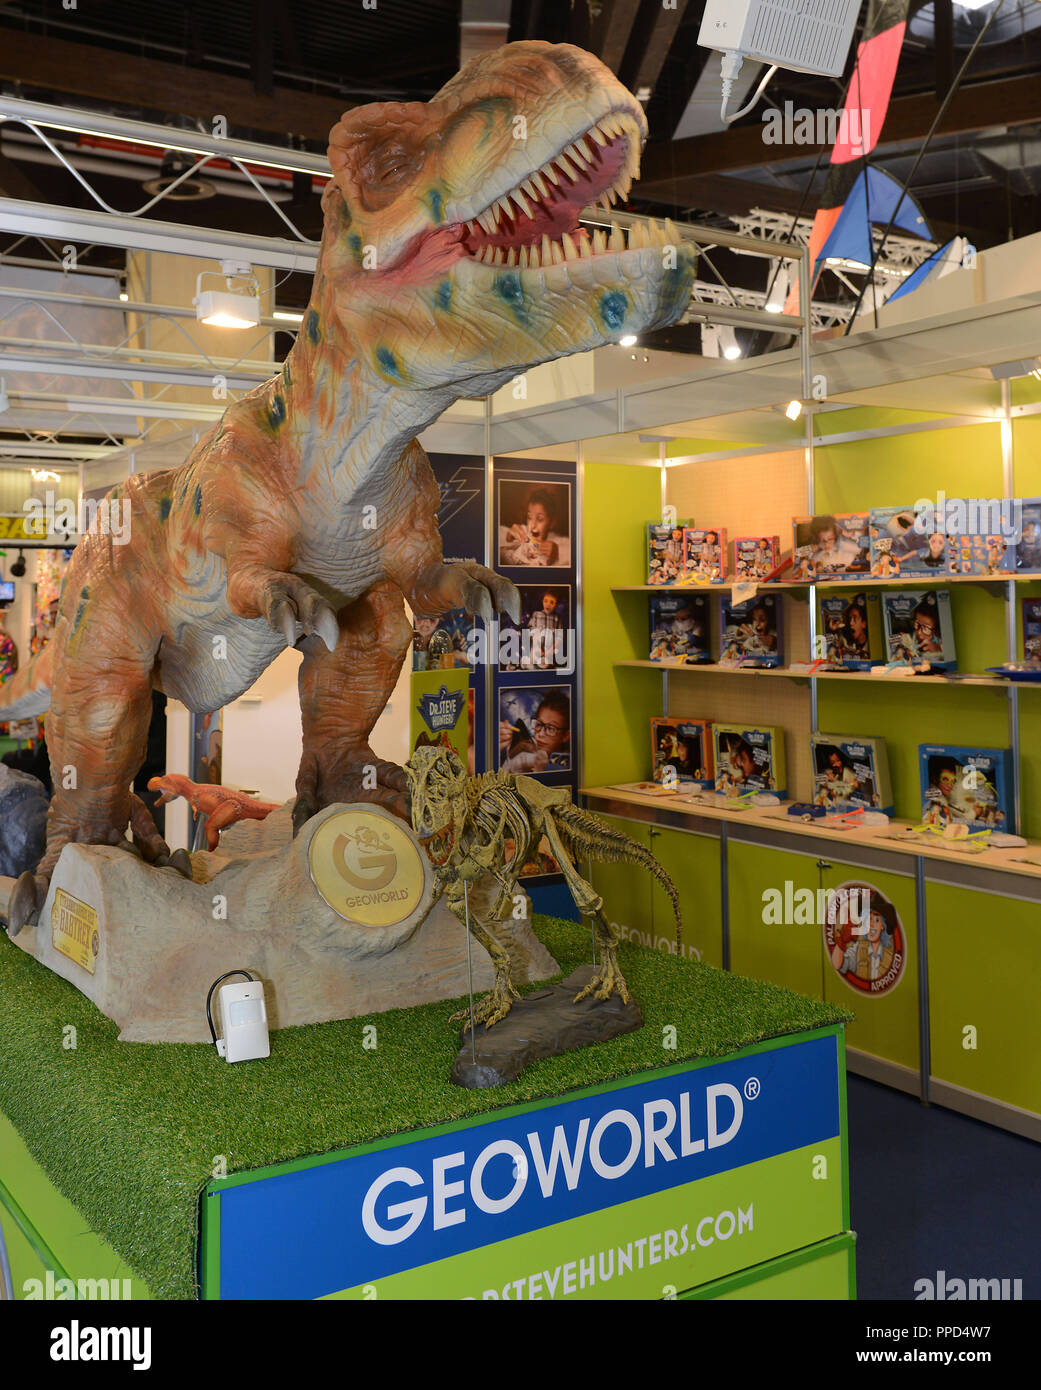 'Dr Steve Hunters' dinosaurs at the Geoworld stand at the Toy Fair in Nuremberg. Stock Photo